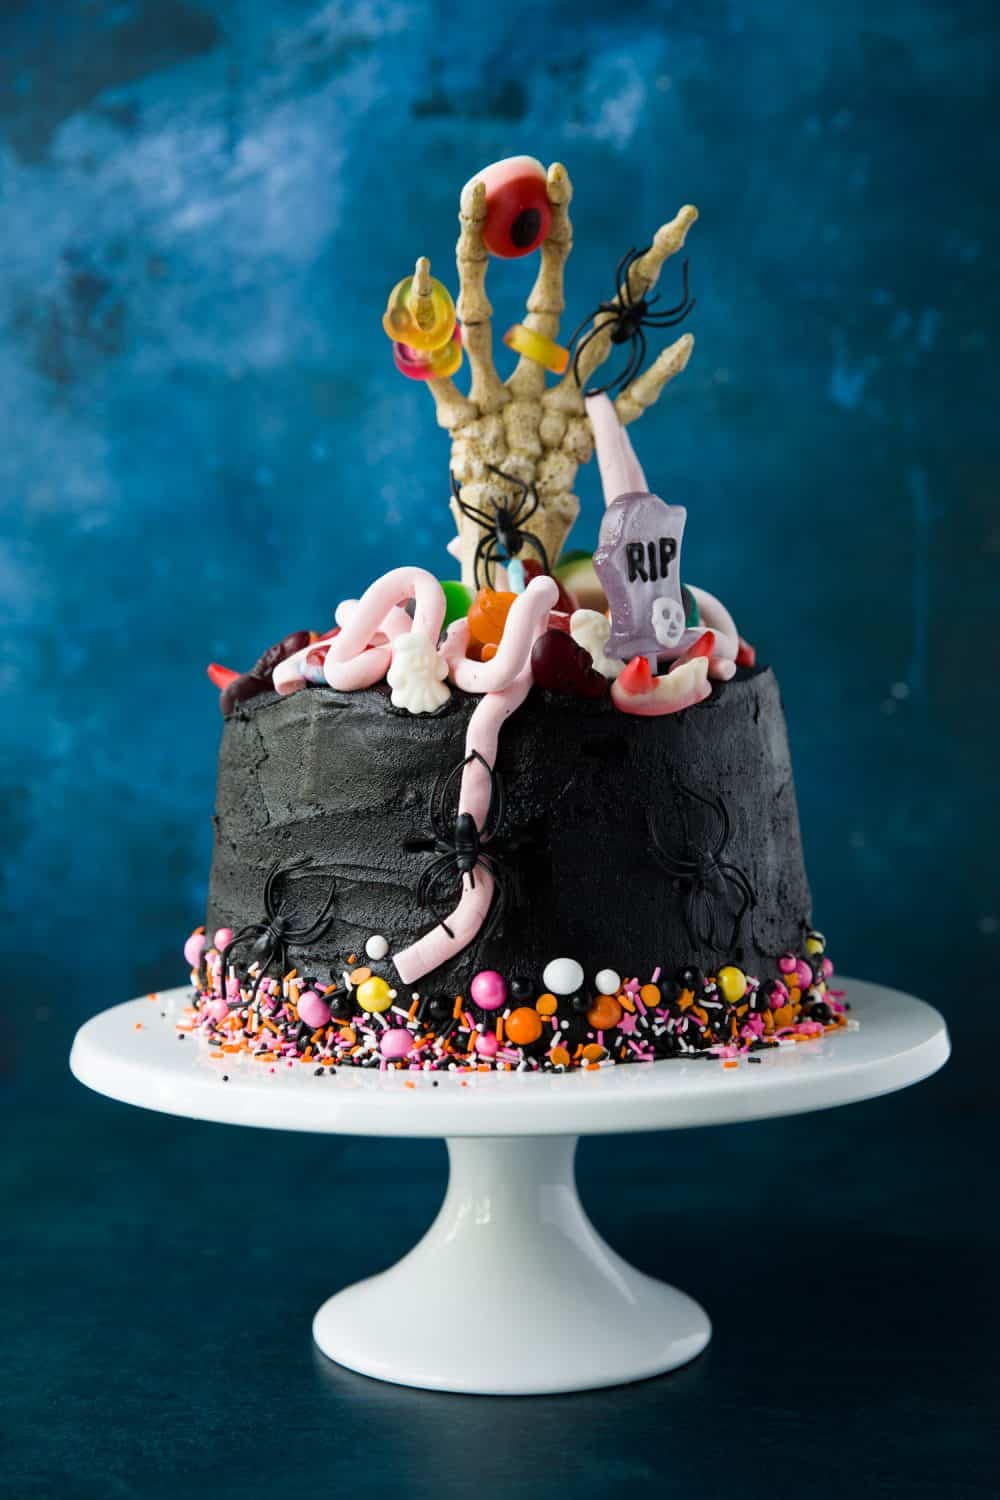 A 5 layer chocolate cake covered with black buttercream. There are colourful sprinkles around the bottom of the cake and a skeleton hand sticking out from the middle. The top of the cake is decorated with Halloween sweets.